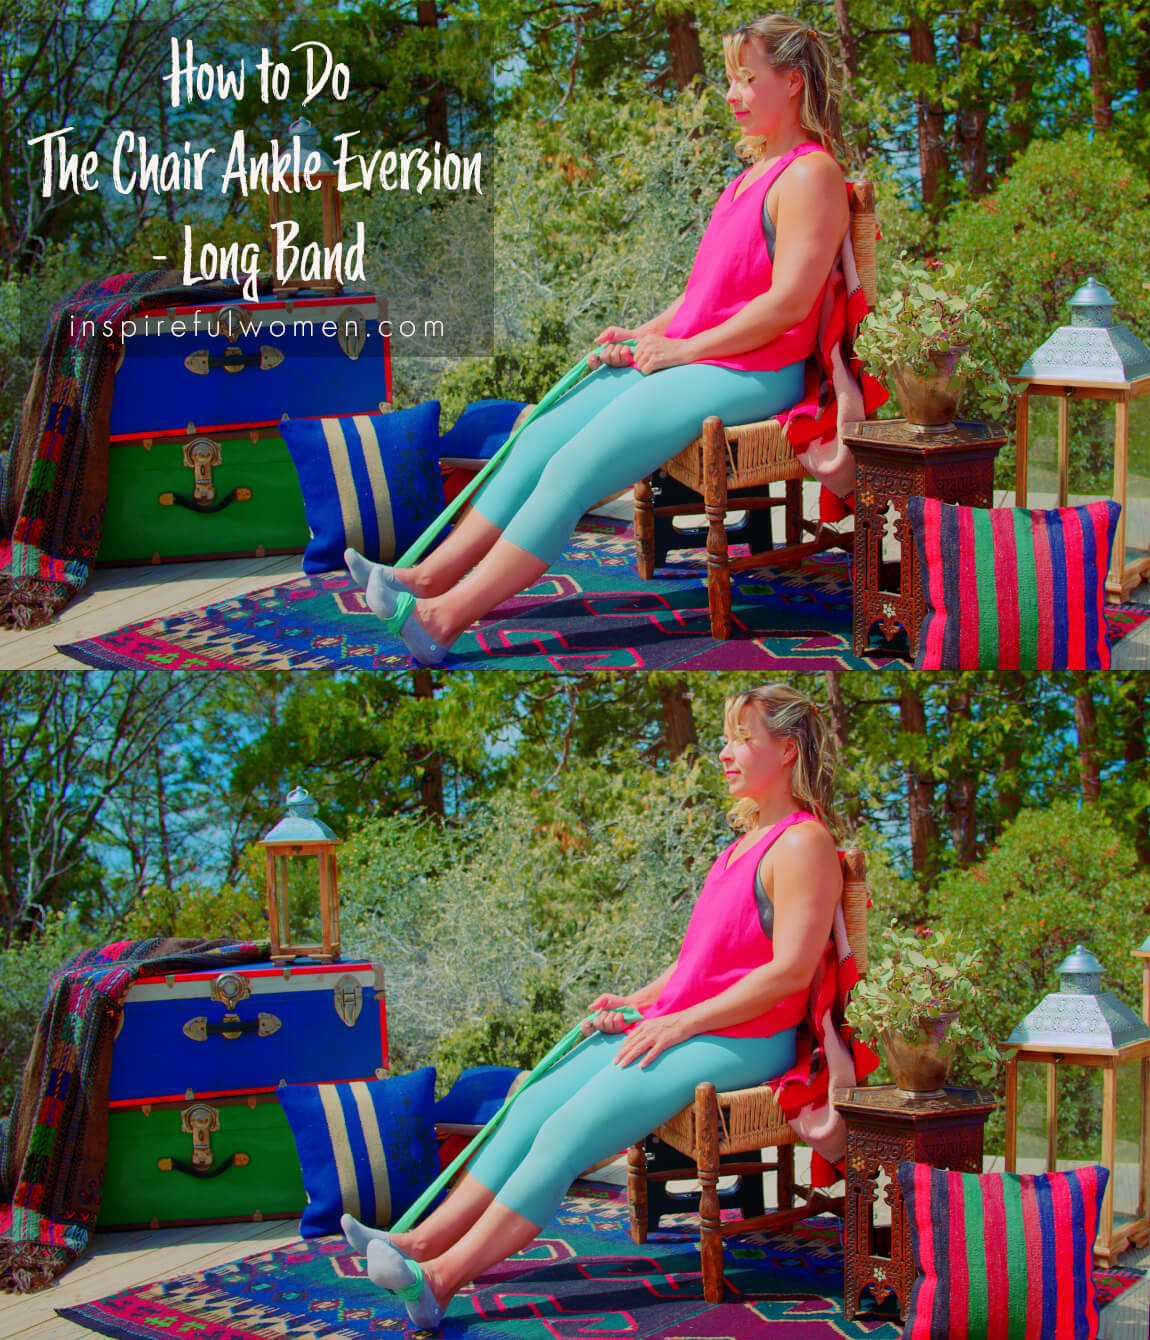 how-to-chair-seated-ankle-eversion-long-band-foot-anchor-workout-proper-form-side